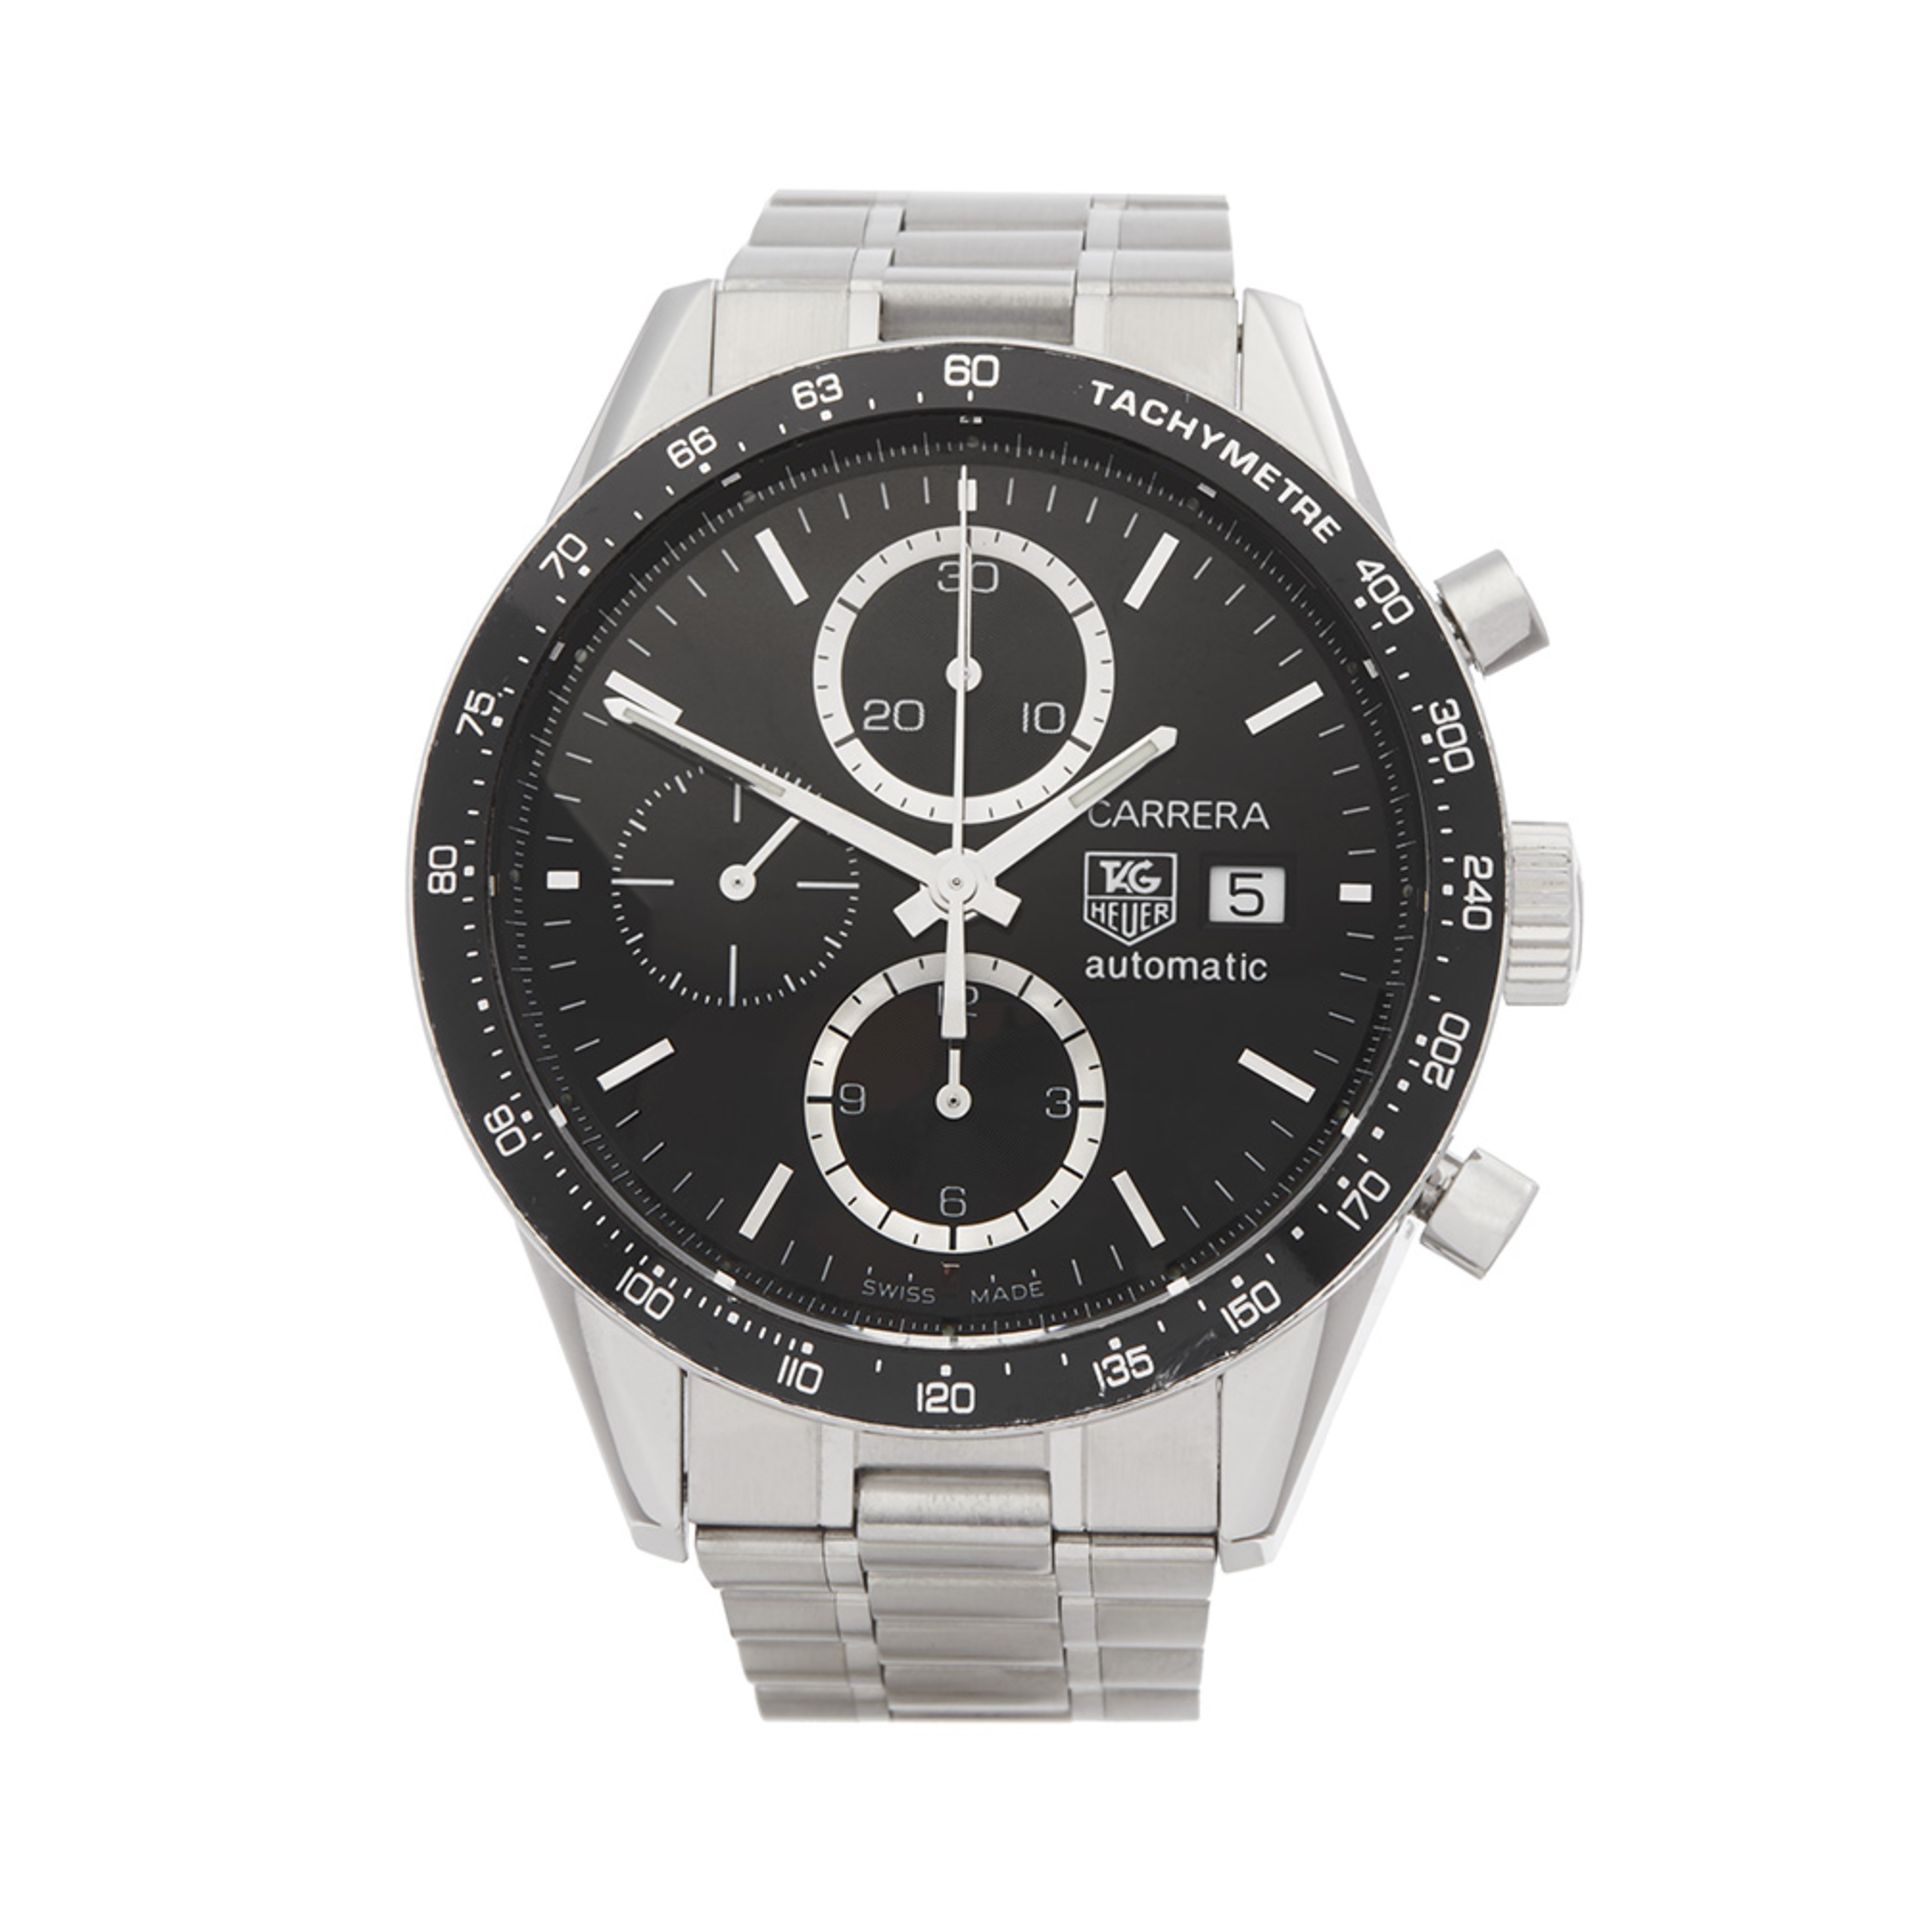 Tag Heuer Carrera - Image 2 of 7